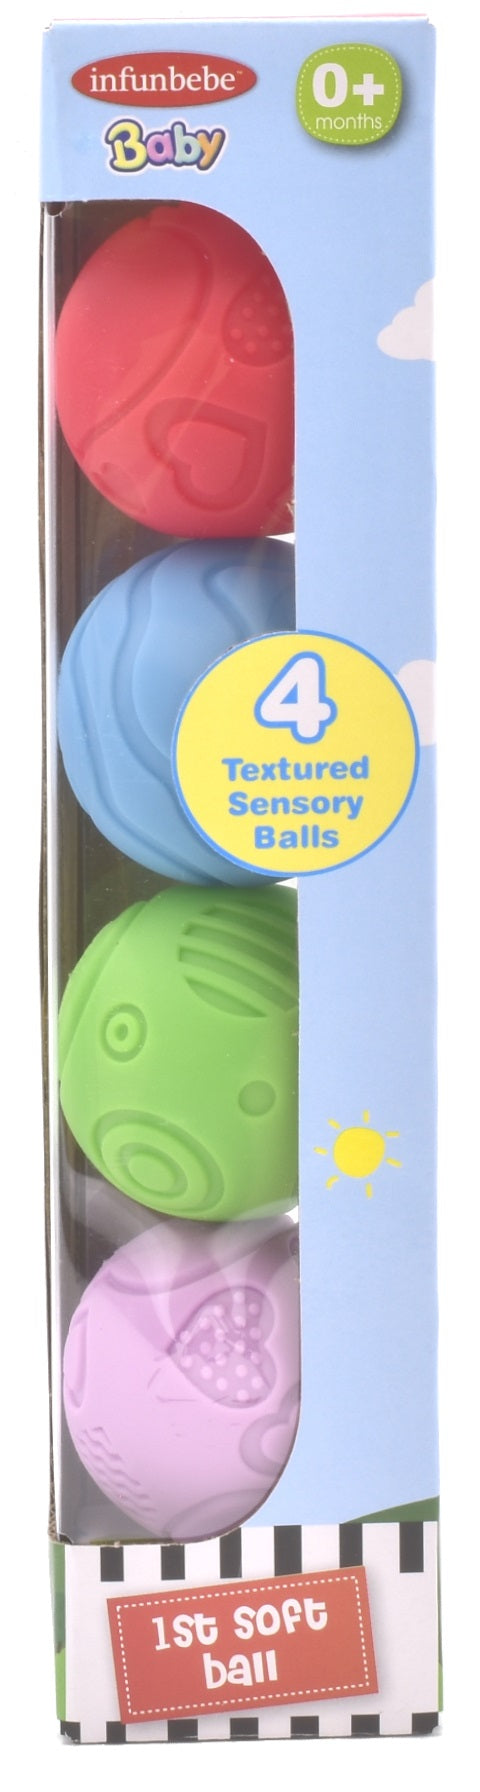 Infunbebe Baby First Soft Ball (4 Pack)